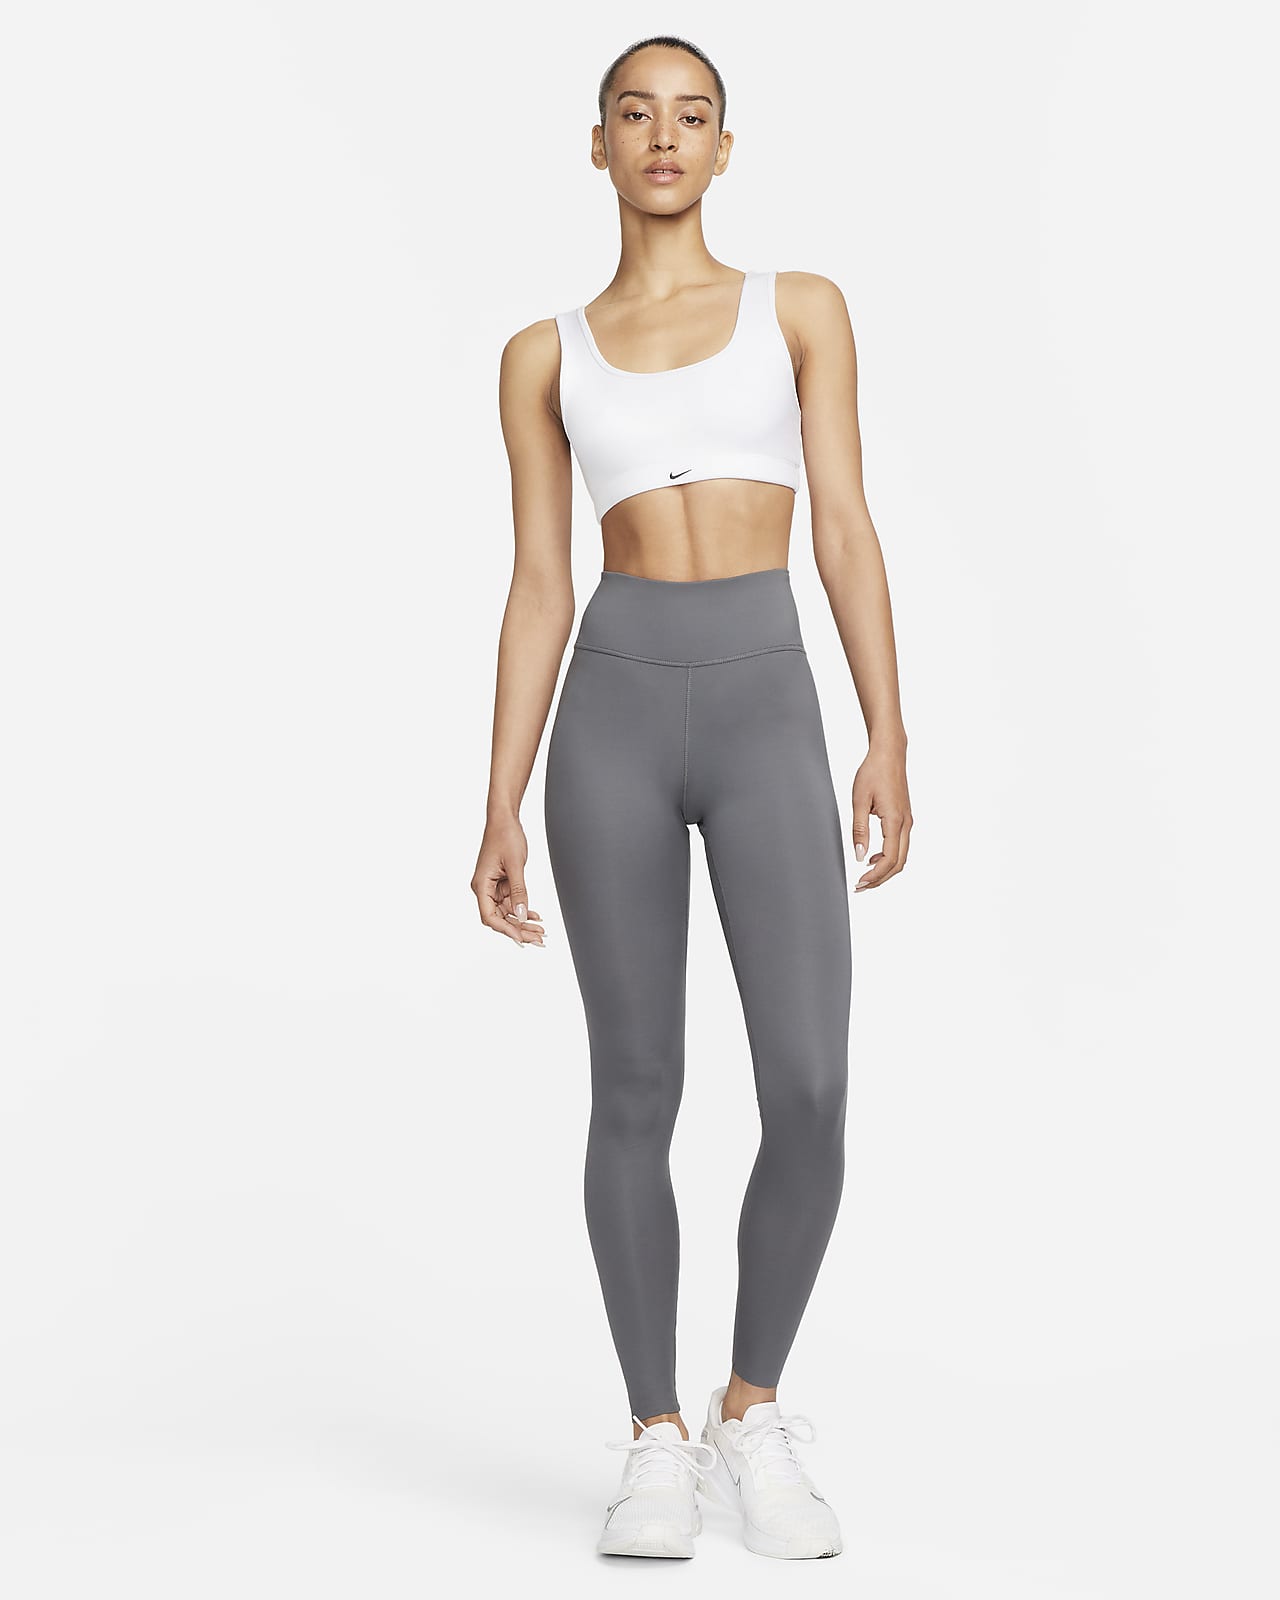 Nike Alate All U Women's Light-Support Lightly Lined Ribbed Sports Bra.